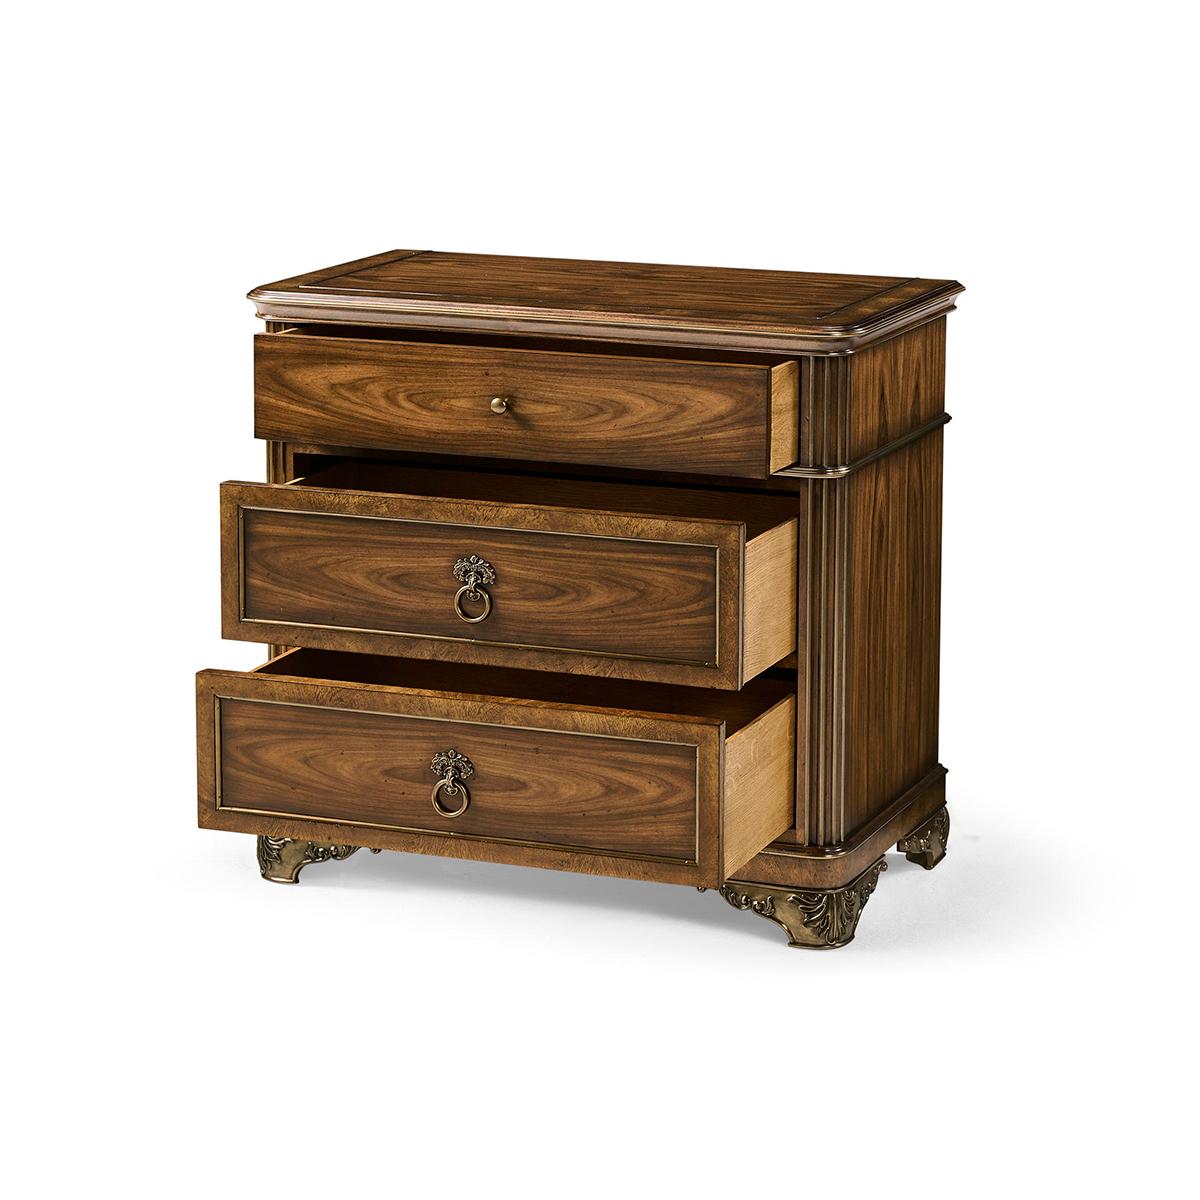 Neoclassical Neo Classic Inspired Bedside Chest For Sale